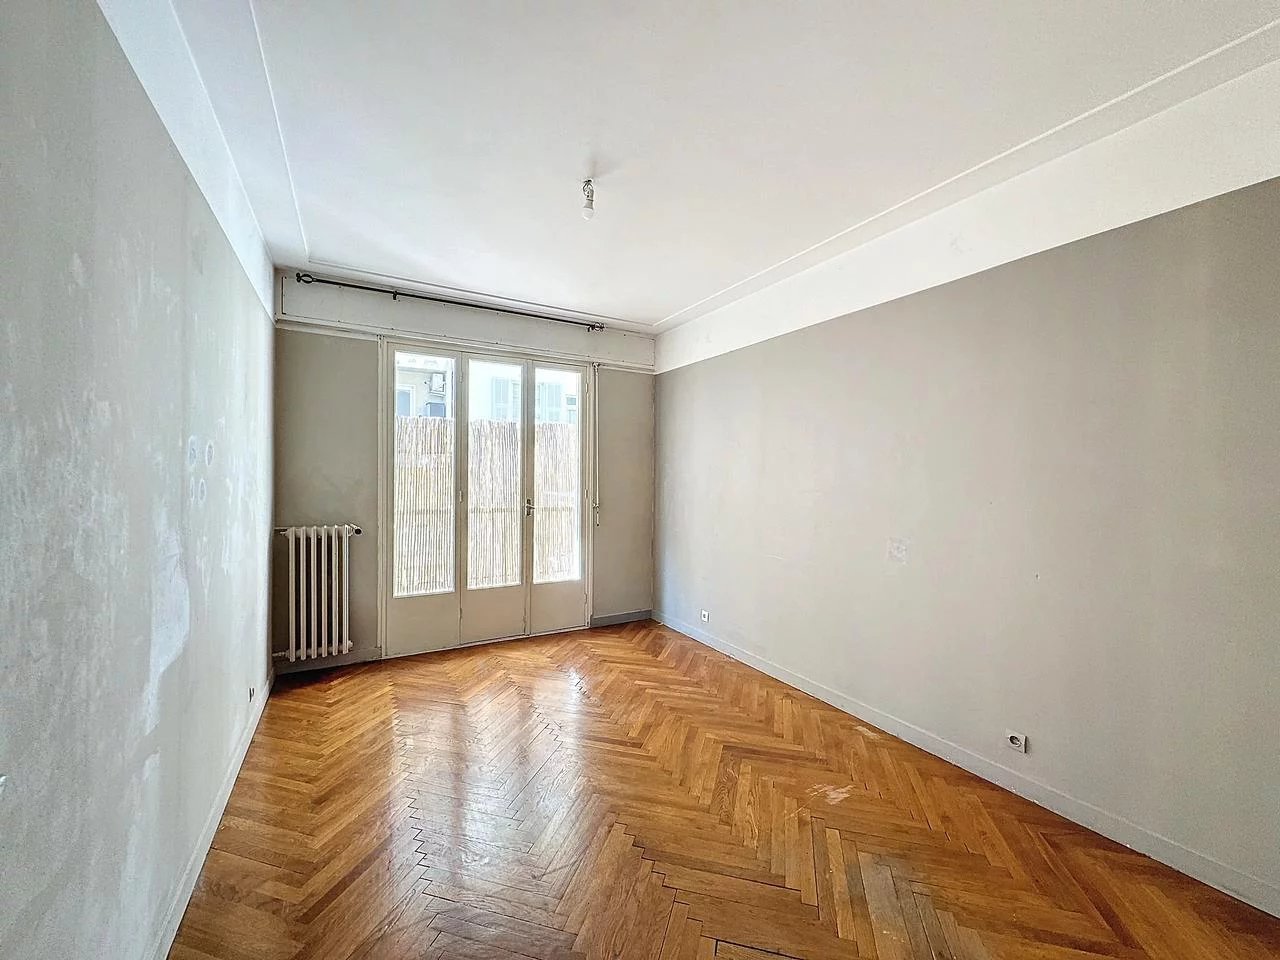 Appartement  3 Rooms 71.15m2  for sale   298 000 €